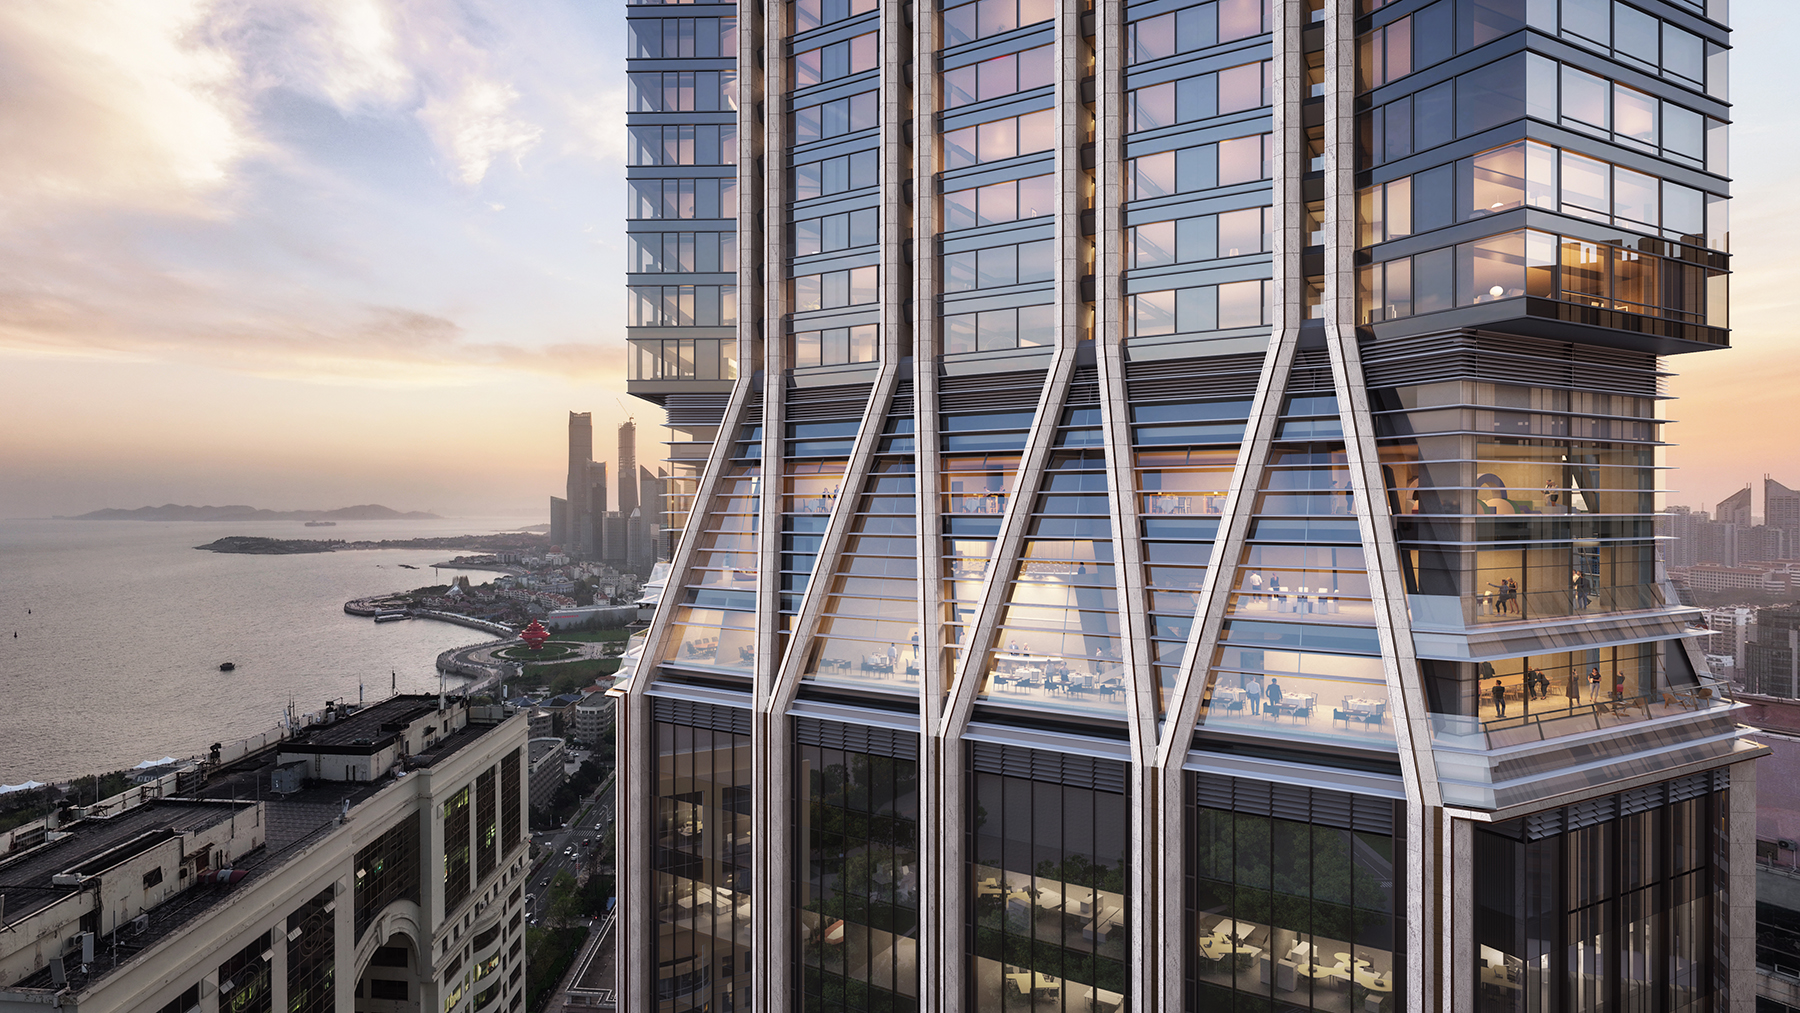 Sea views highlighted in Foster + Partners Qingdao tower design